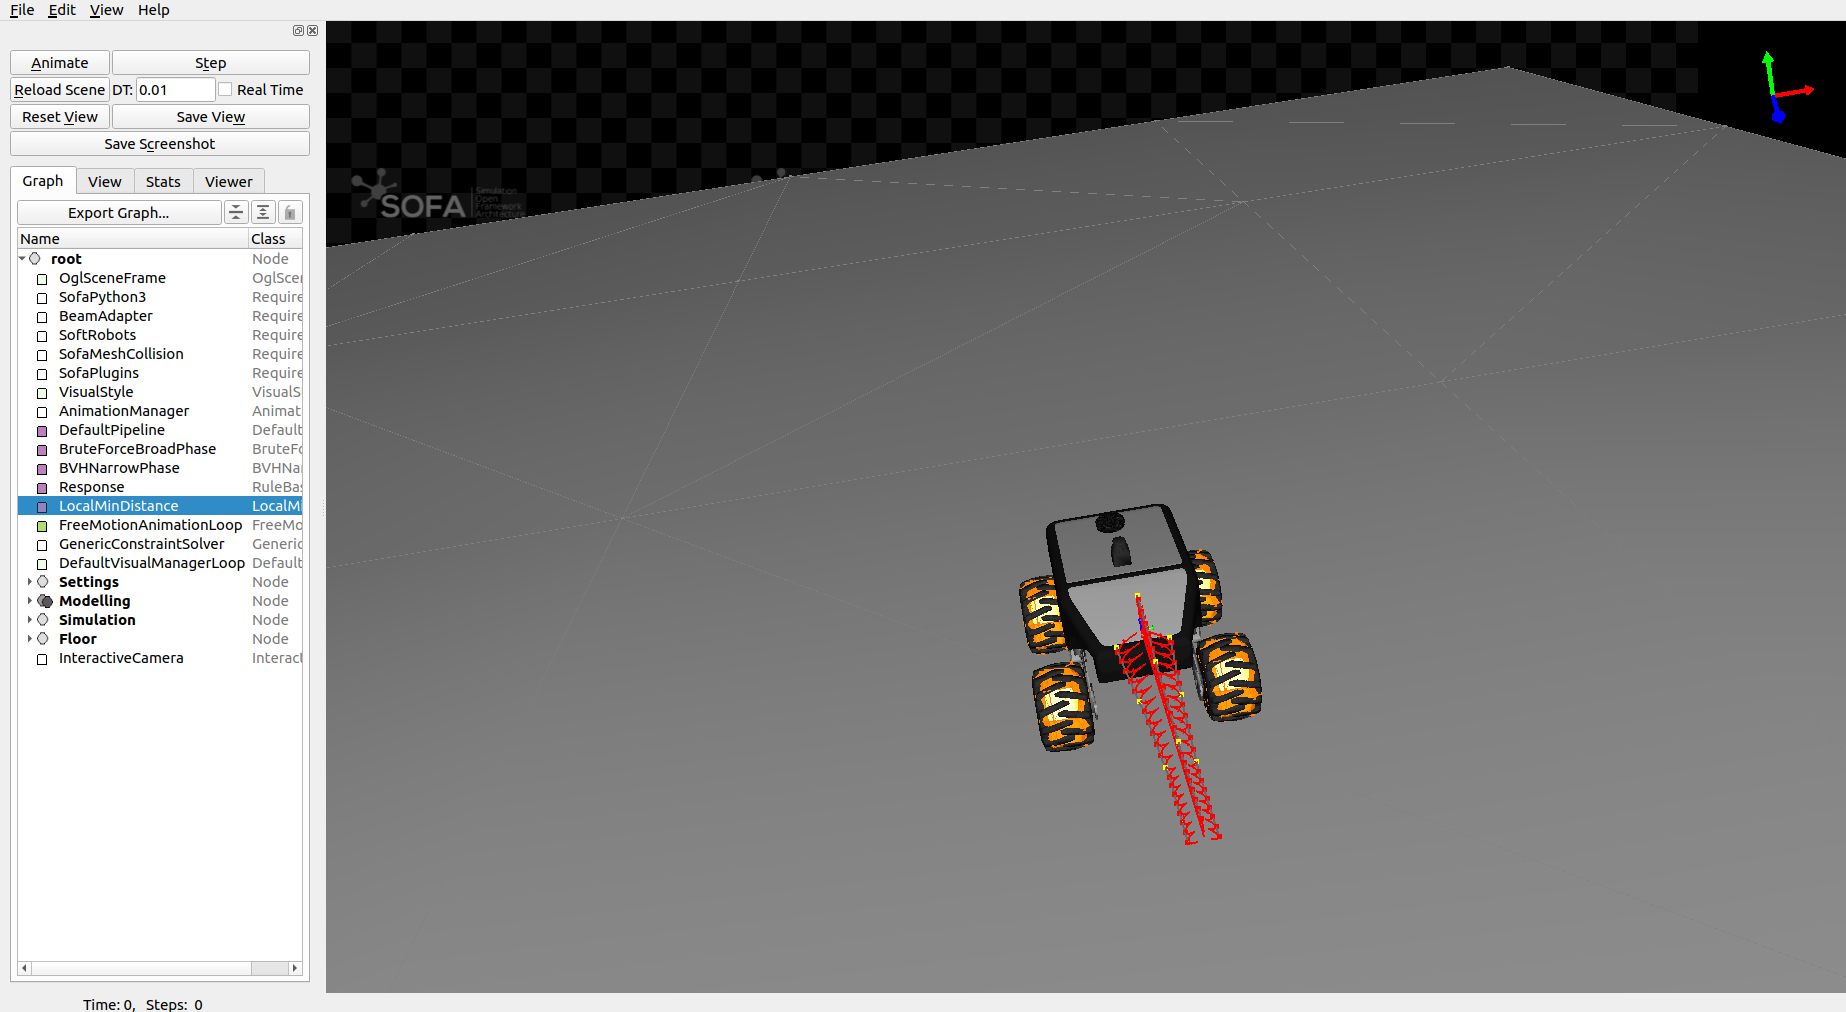 Image showing an interactive four wheel robots with a deformable trunk.